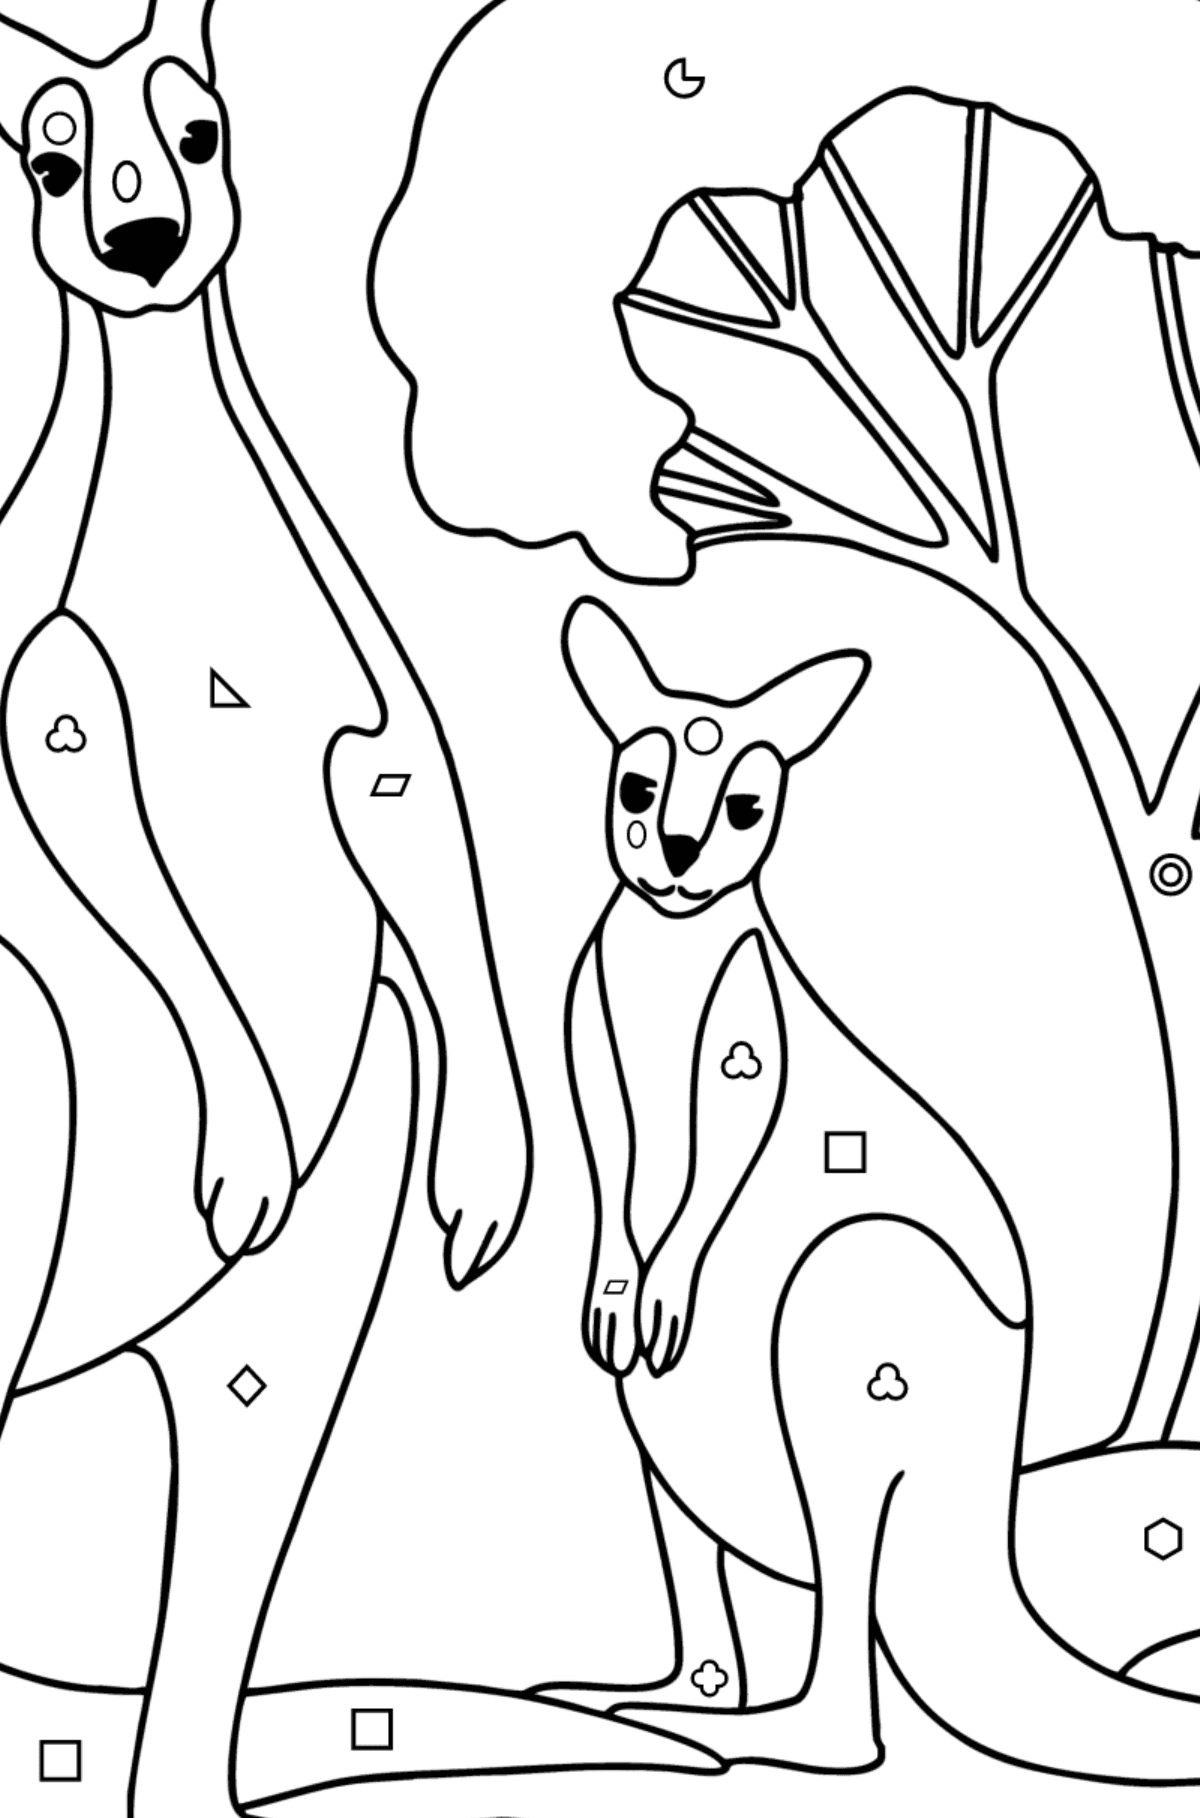 Kangaroo with Baby Coloring Page - Coloring by Geometric Shapes for Kids